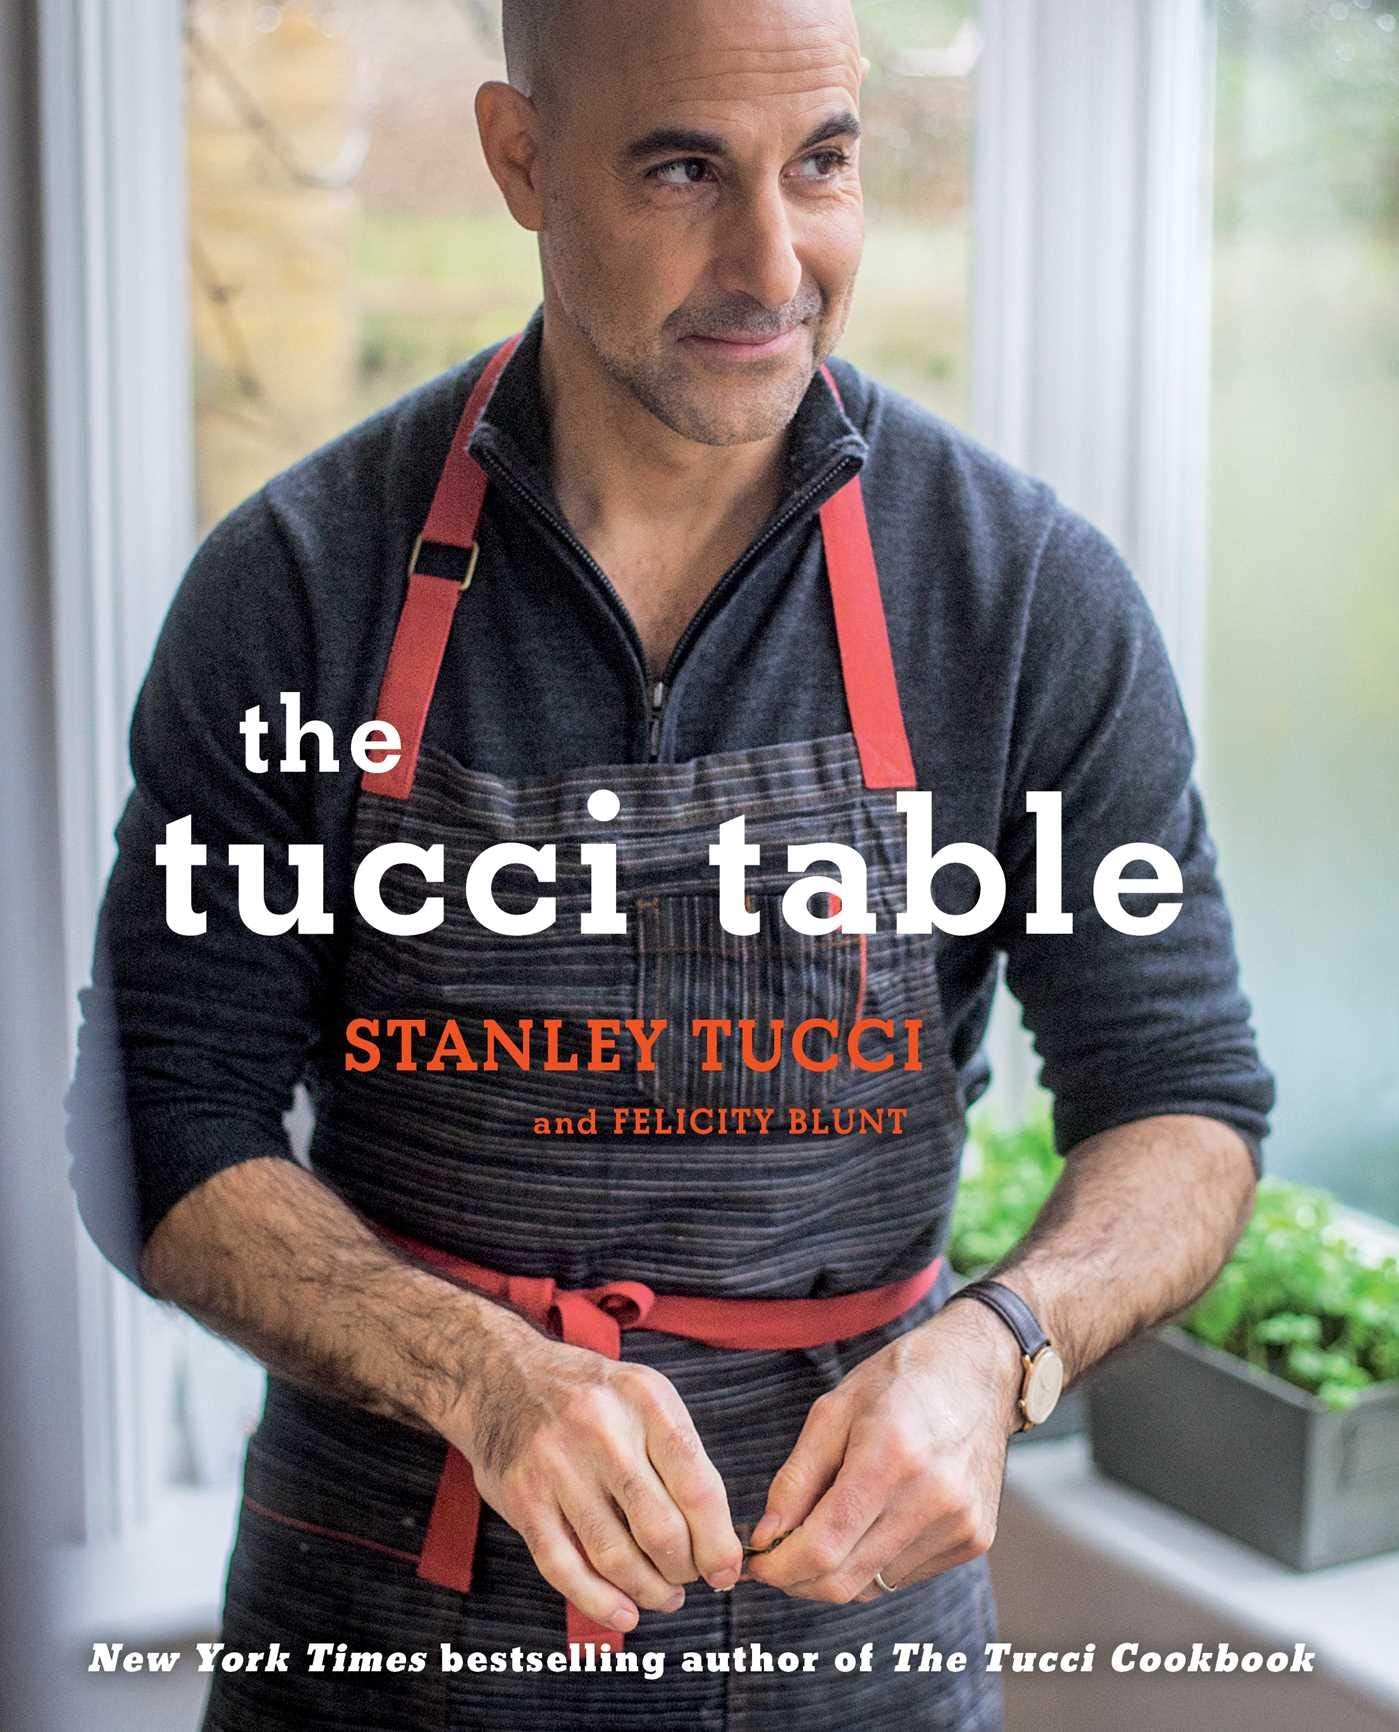 The Tucci Table Author Stanley Tucci LIB-116